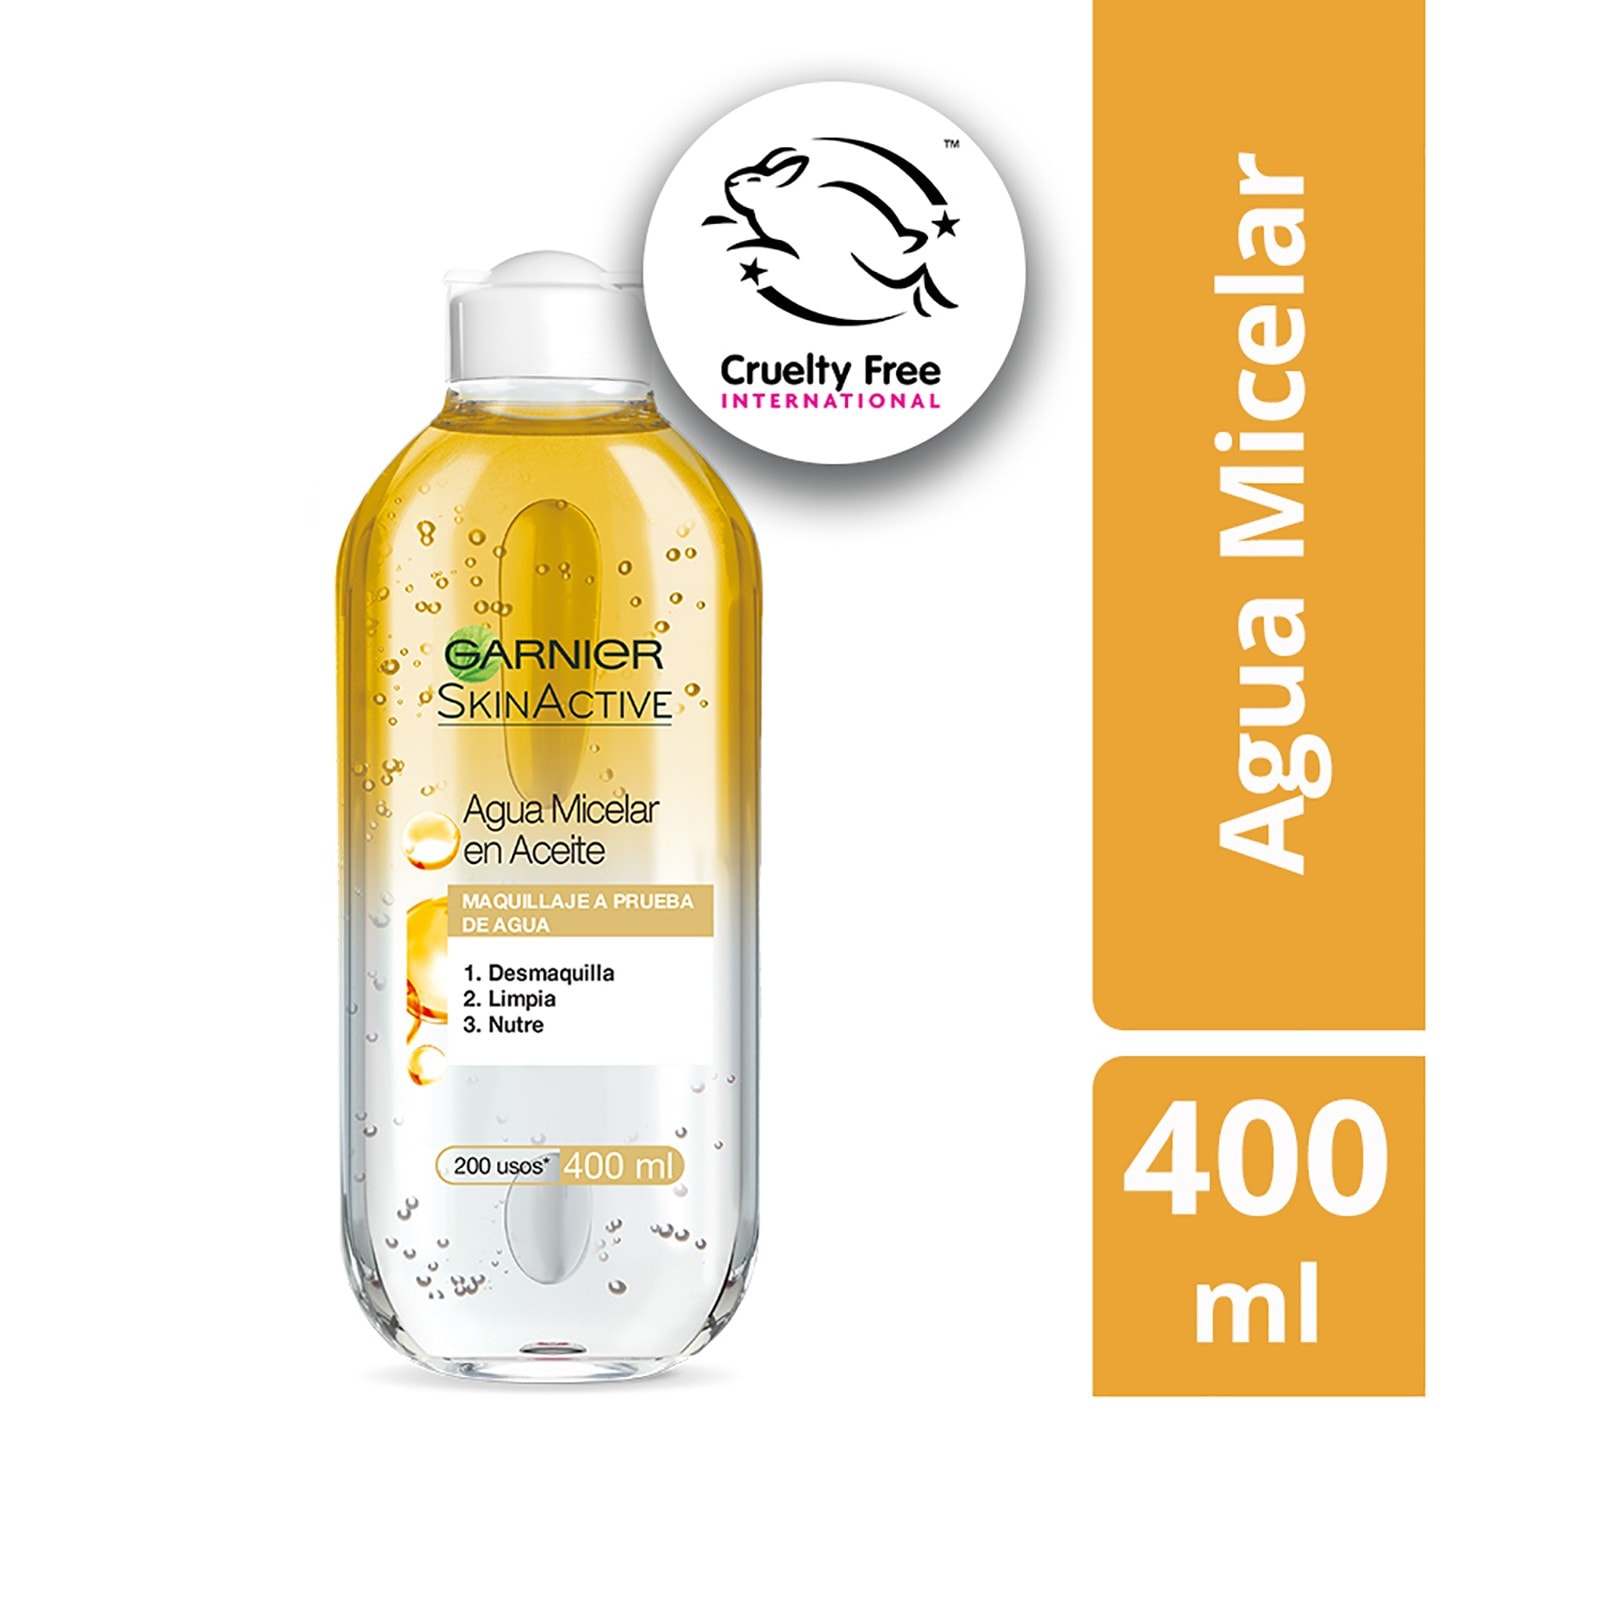 Aguas micelares: SkinActive, Pure Active